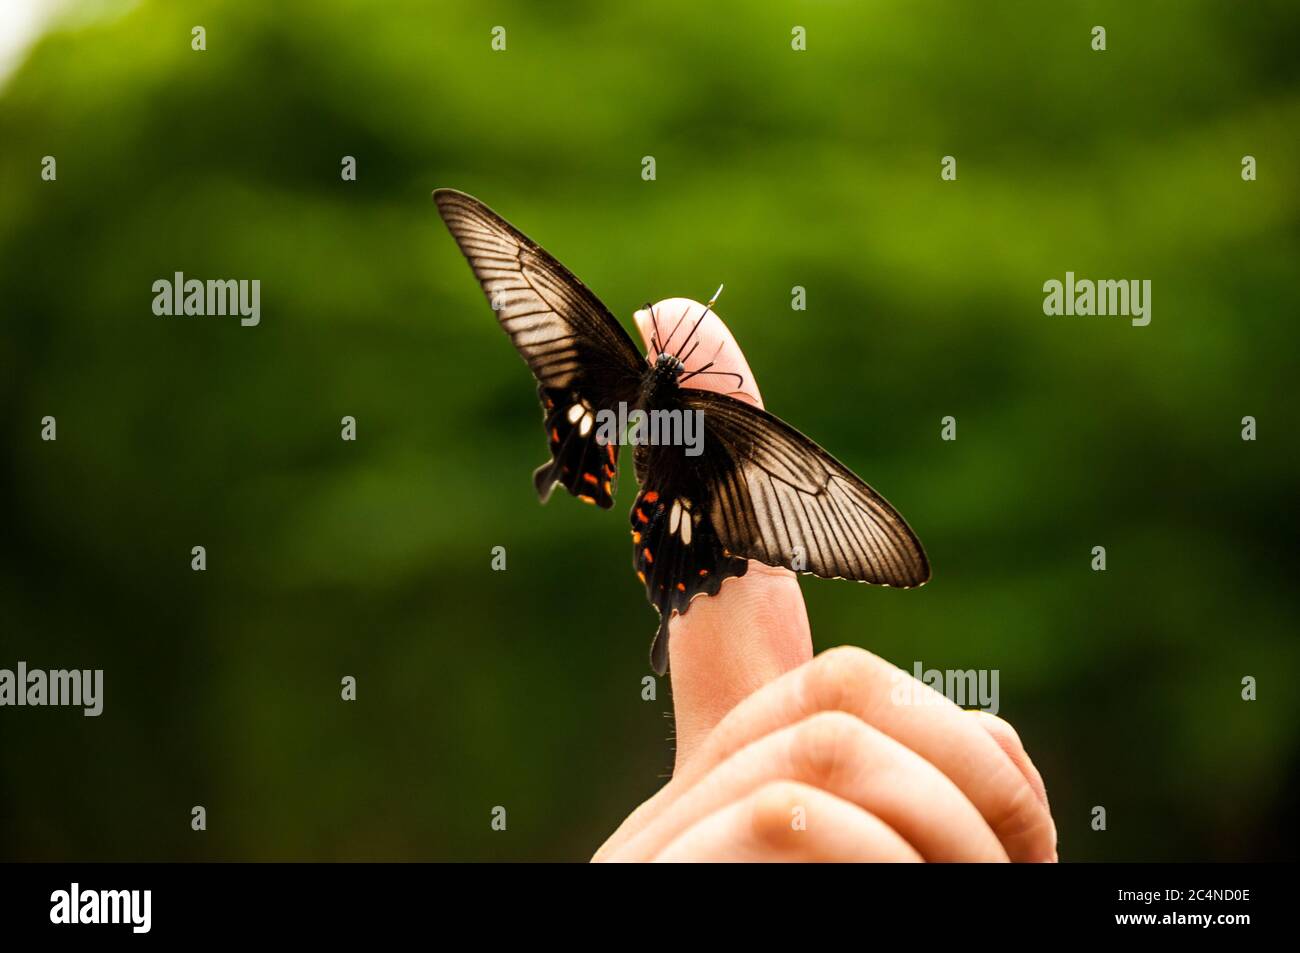 A Common Mormon butterfly on a man’s finger in Shanghai’s Lu Xun Park. Stock Photo